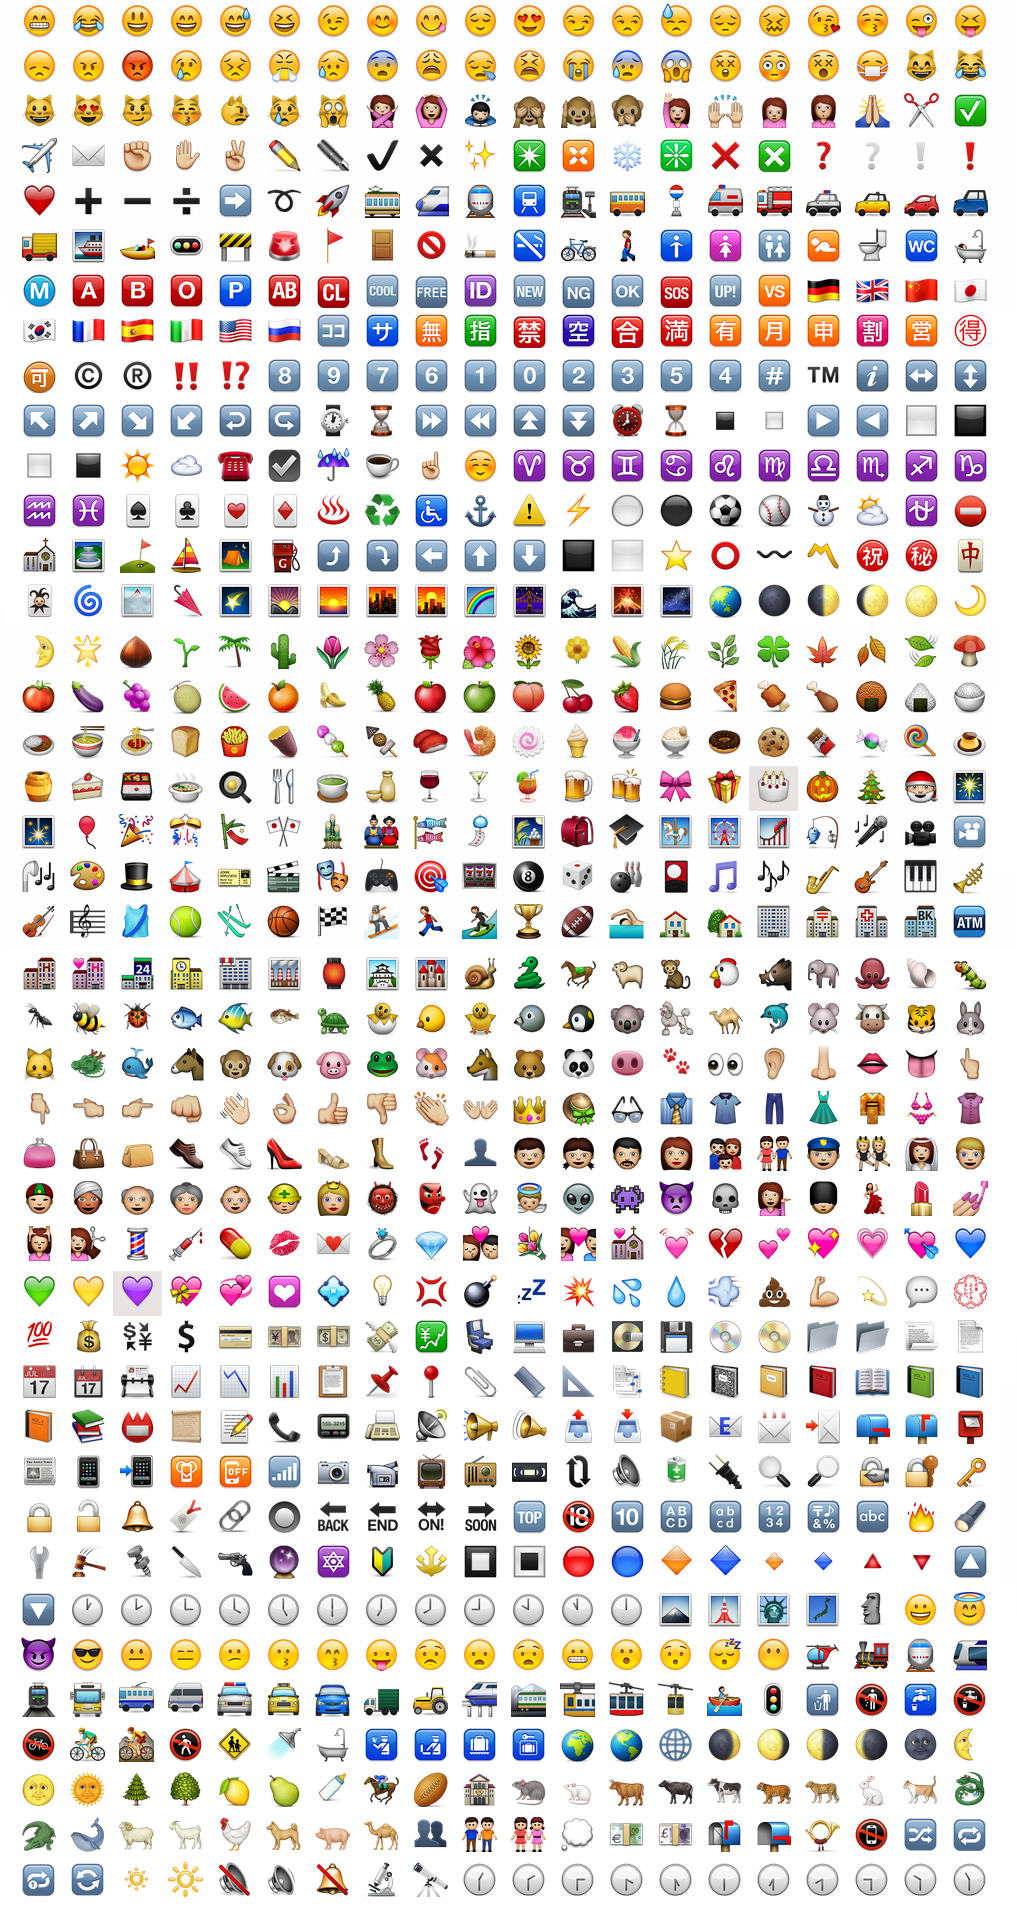 List of All iPhone Emojis